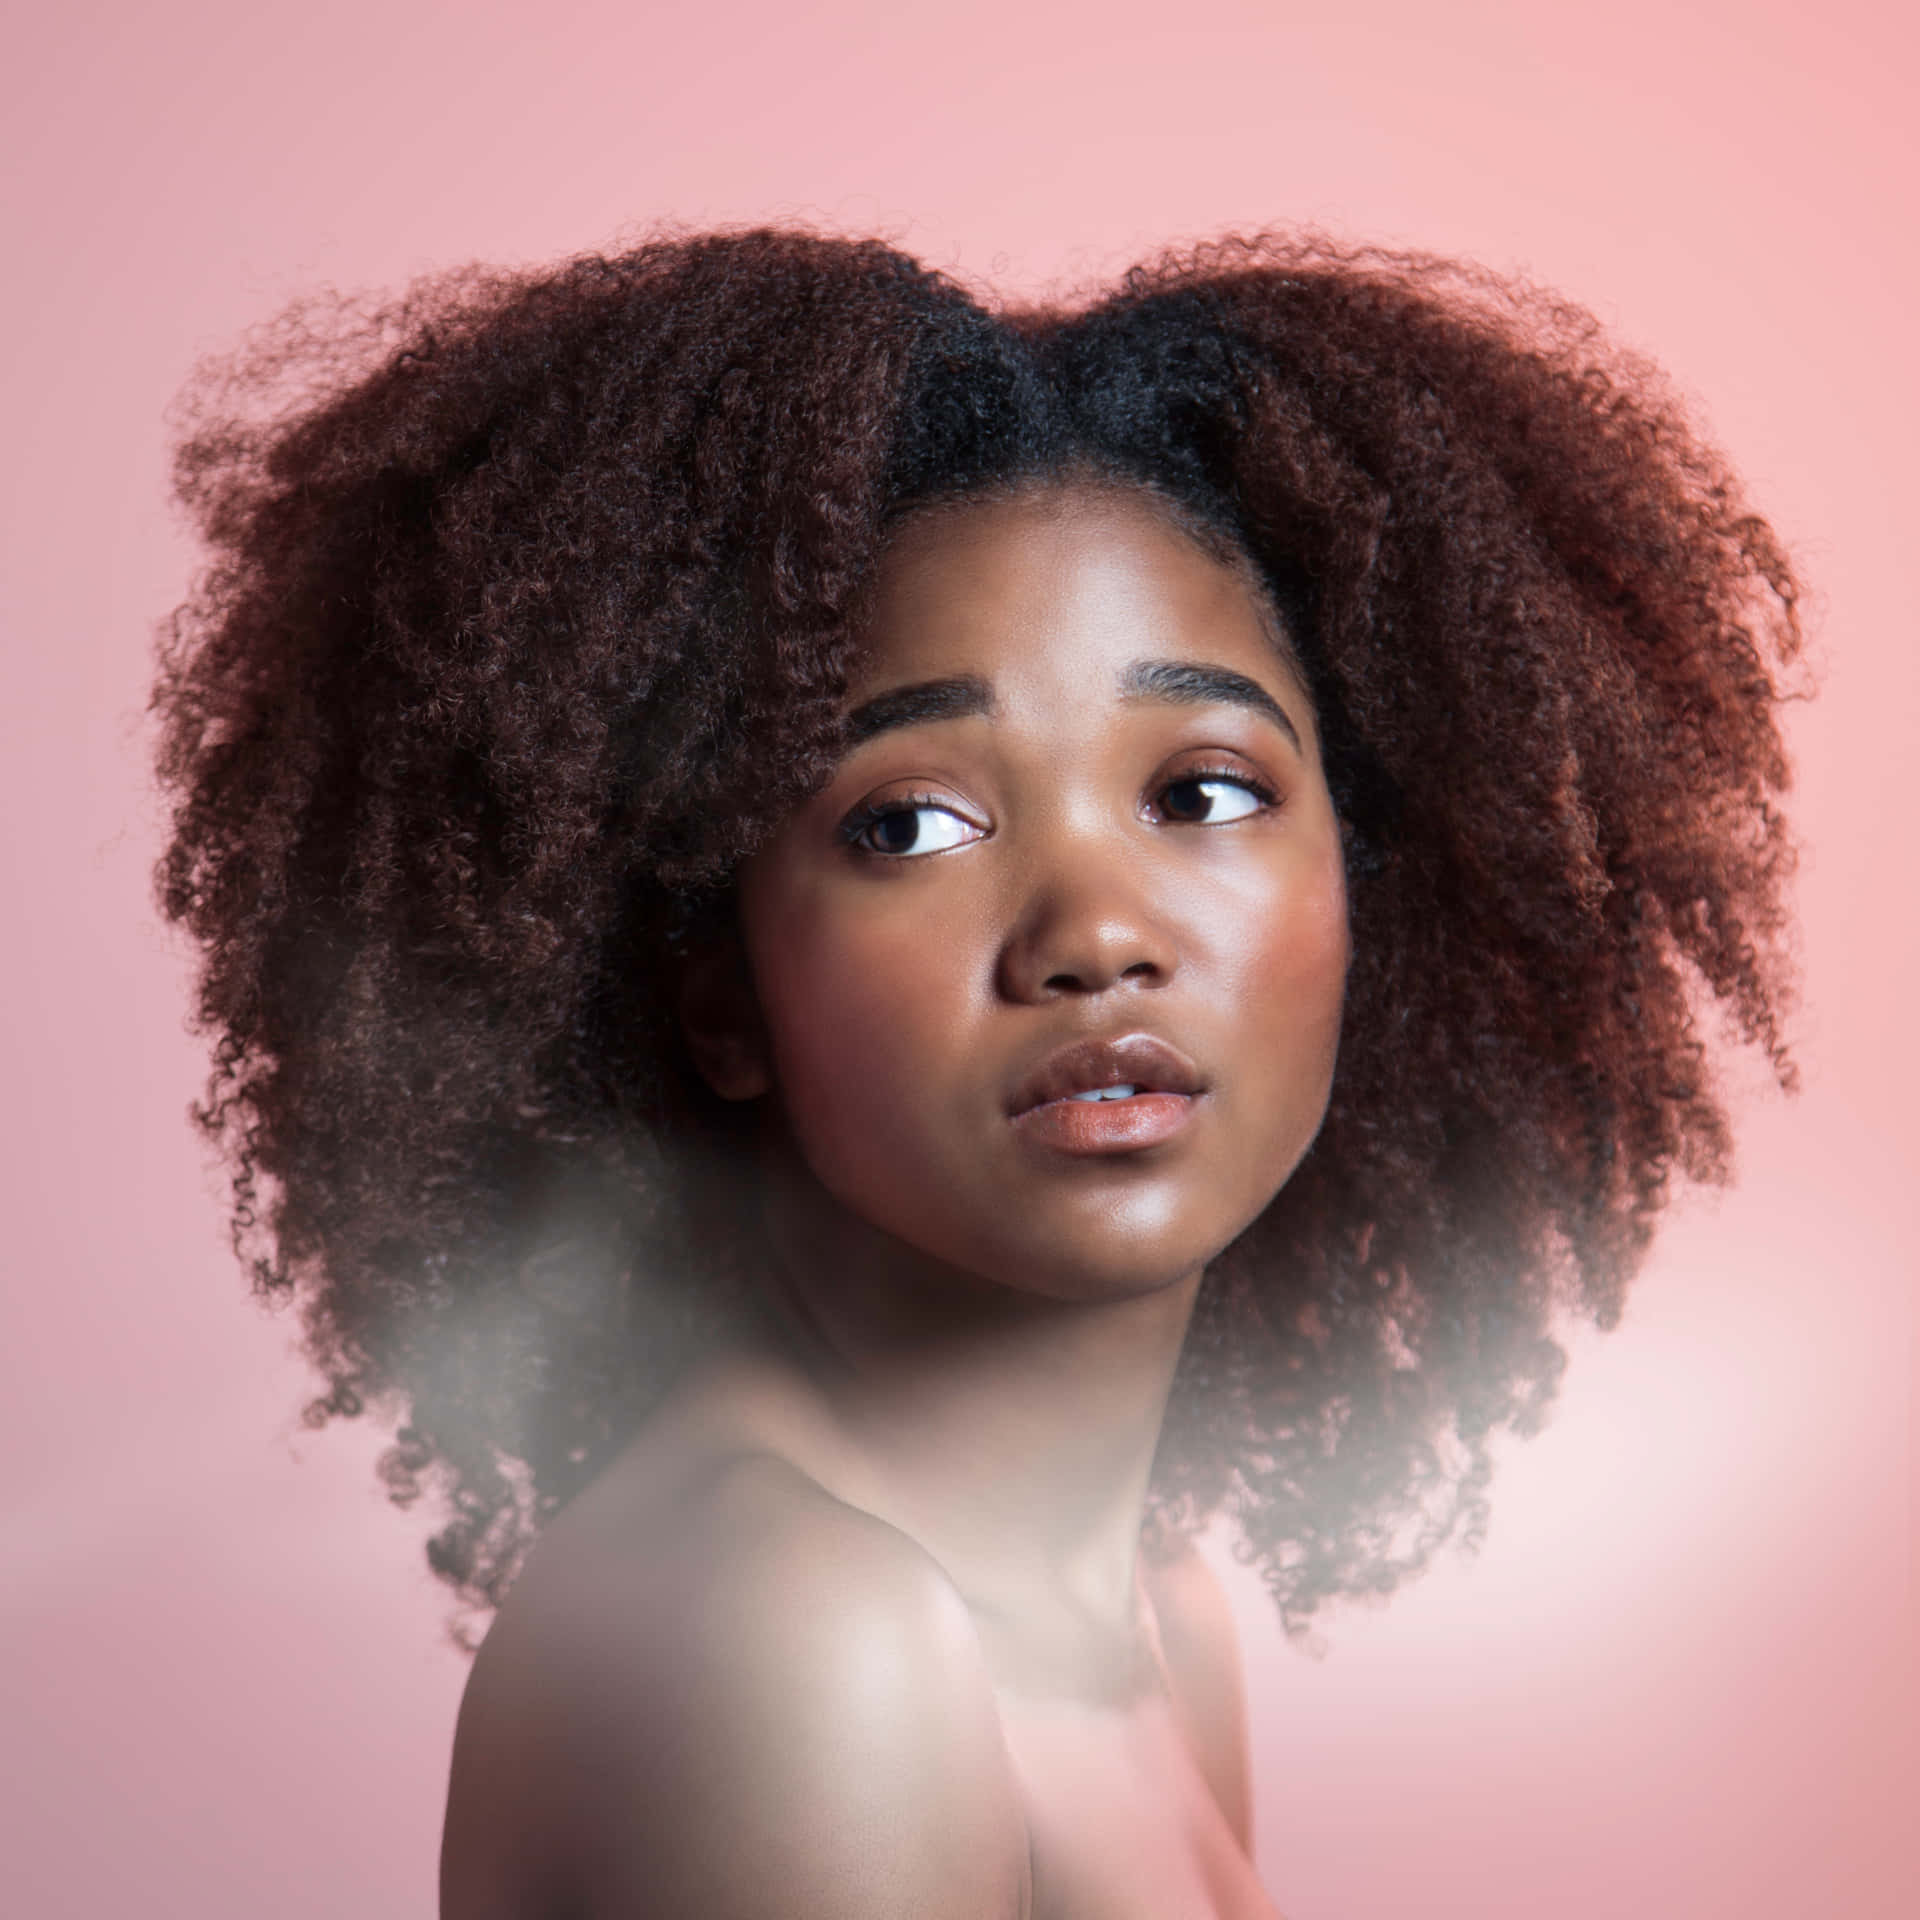 Empowered Young Black Woman with Afro Hair Wallpaper